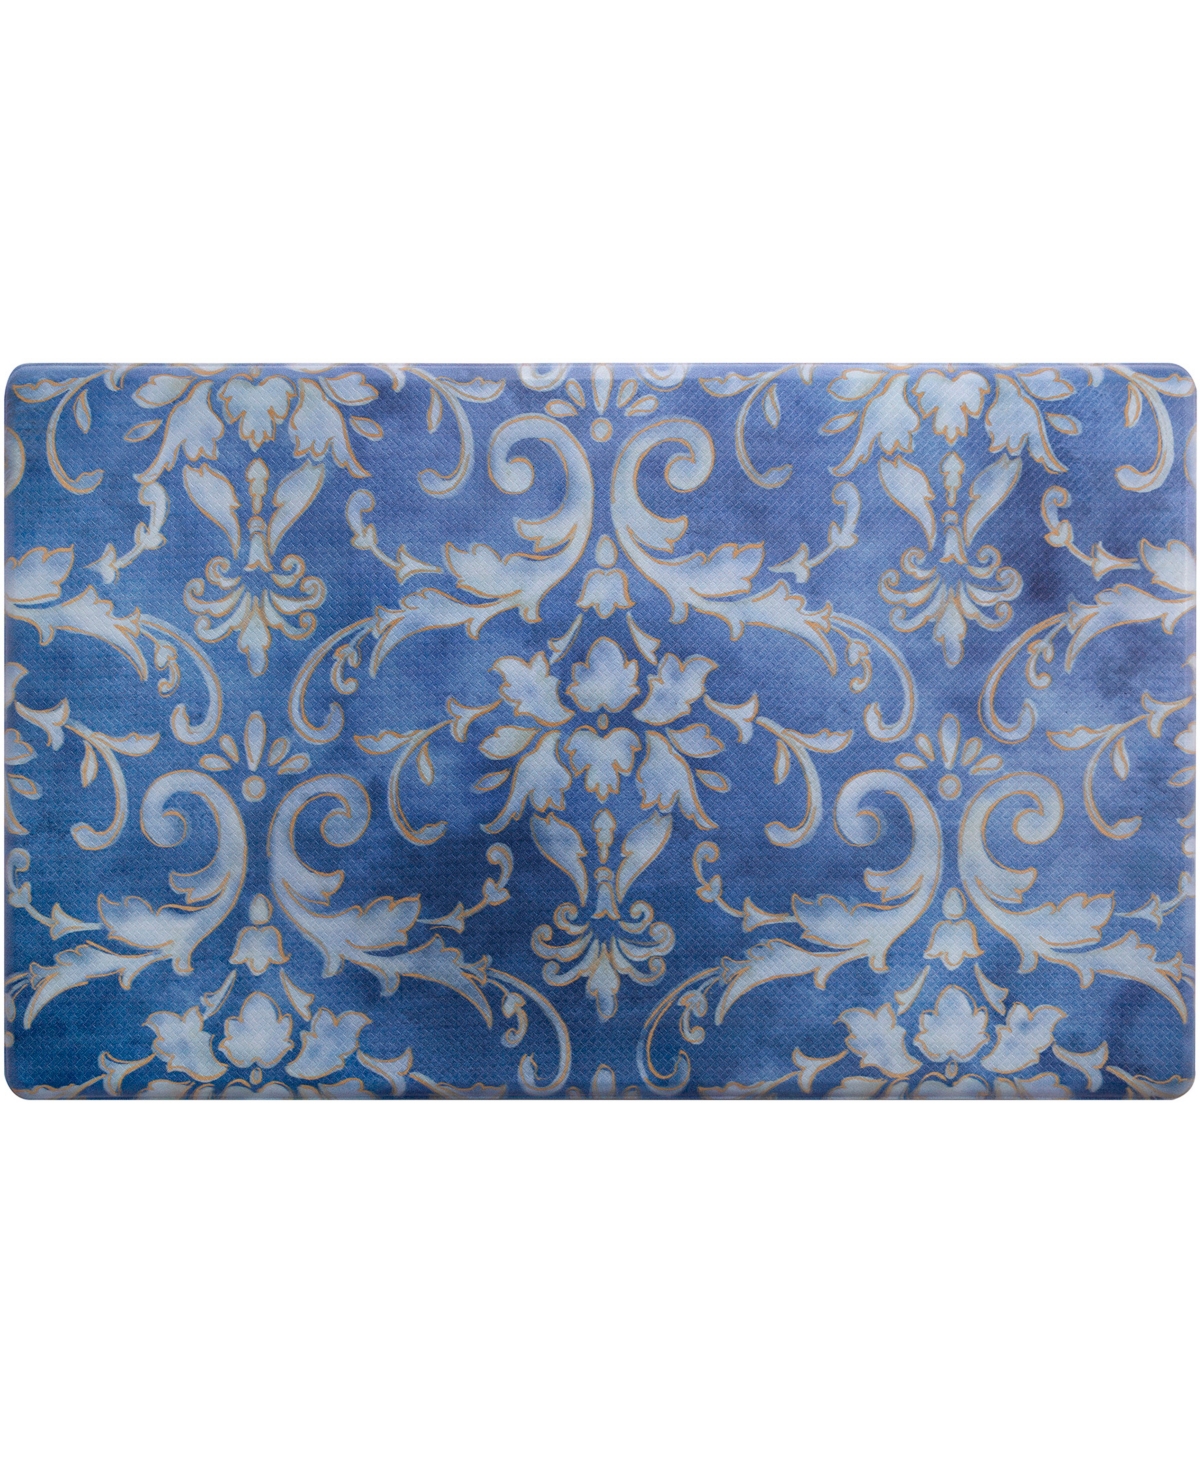 Global Rug Designs Cheerful Ways Watercolor Damask 1'6" X 2'6" Area Rug In Blue,gold-tone